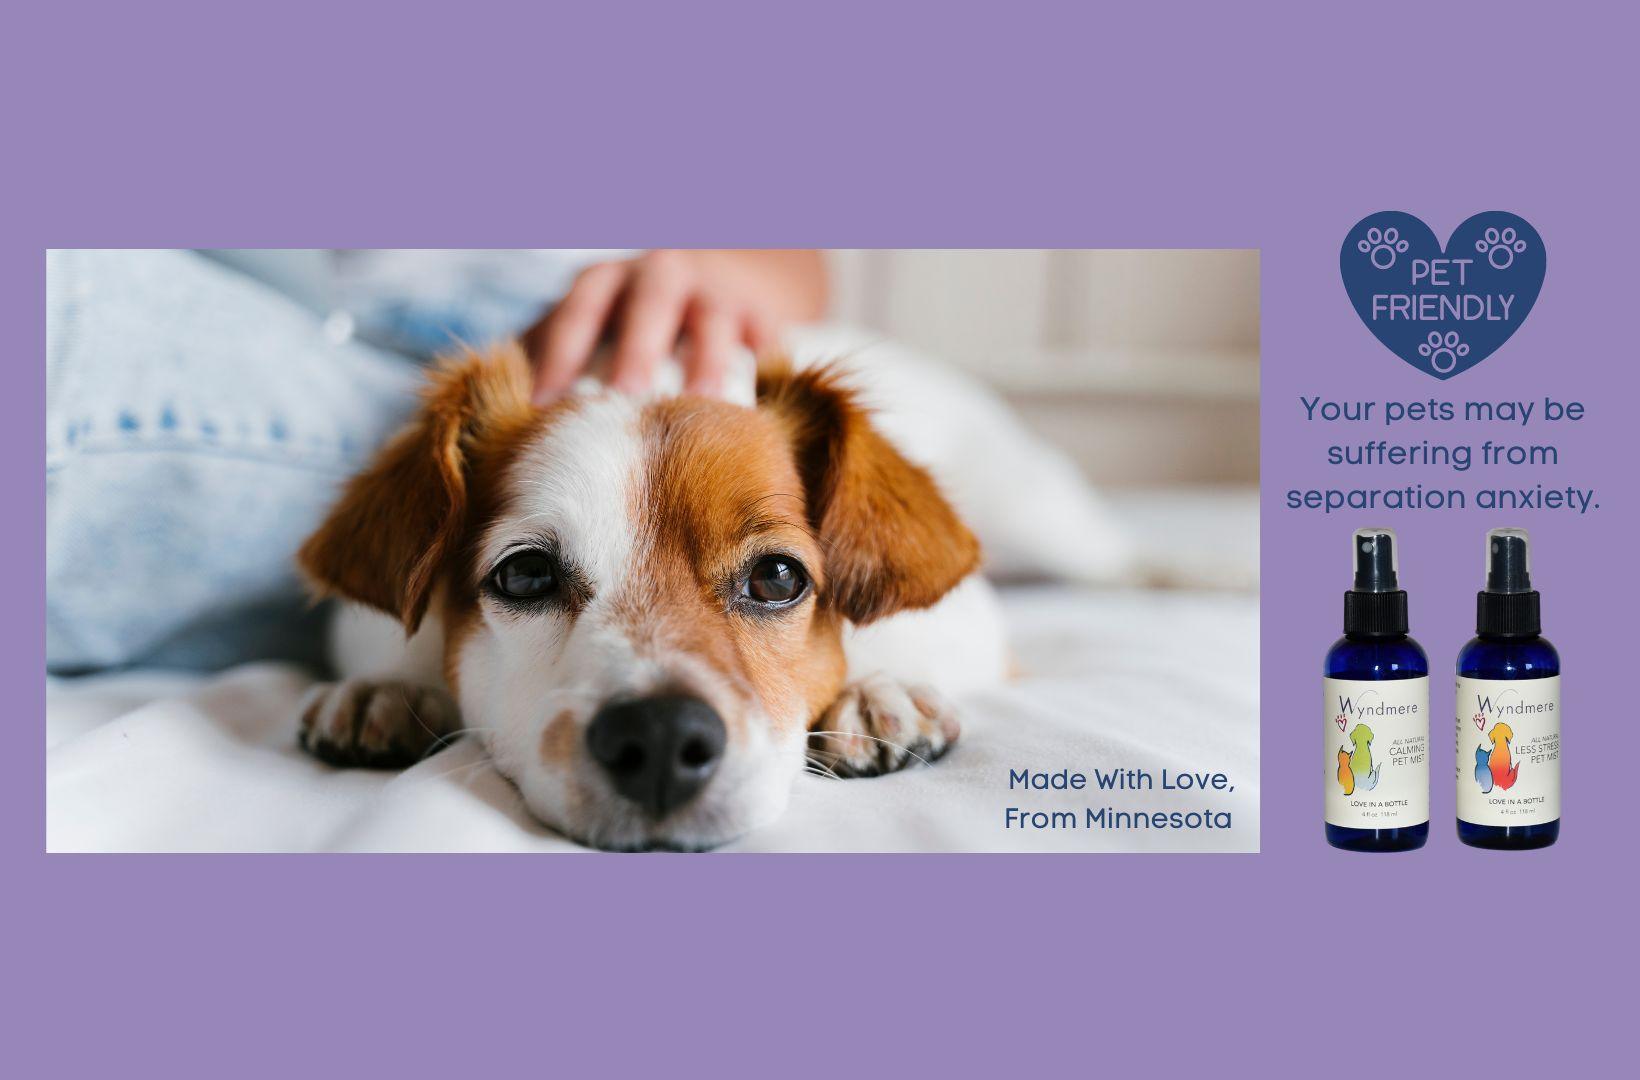 Dog on bed. Pet friendly products to help with separation anxiety - Less Stress and Calming Pet Mists - Wyndmere